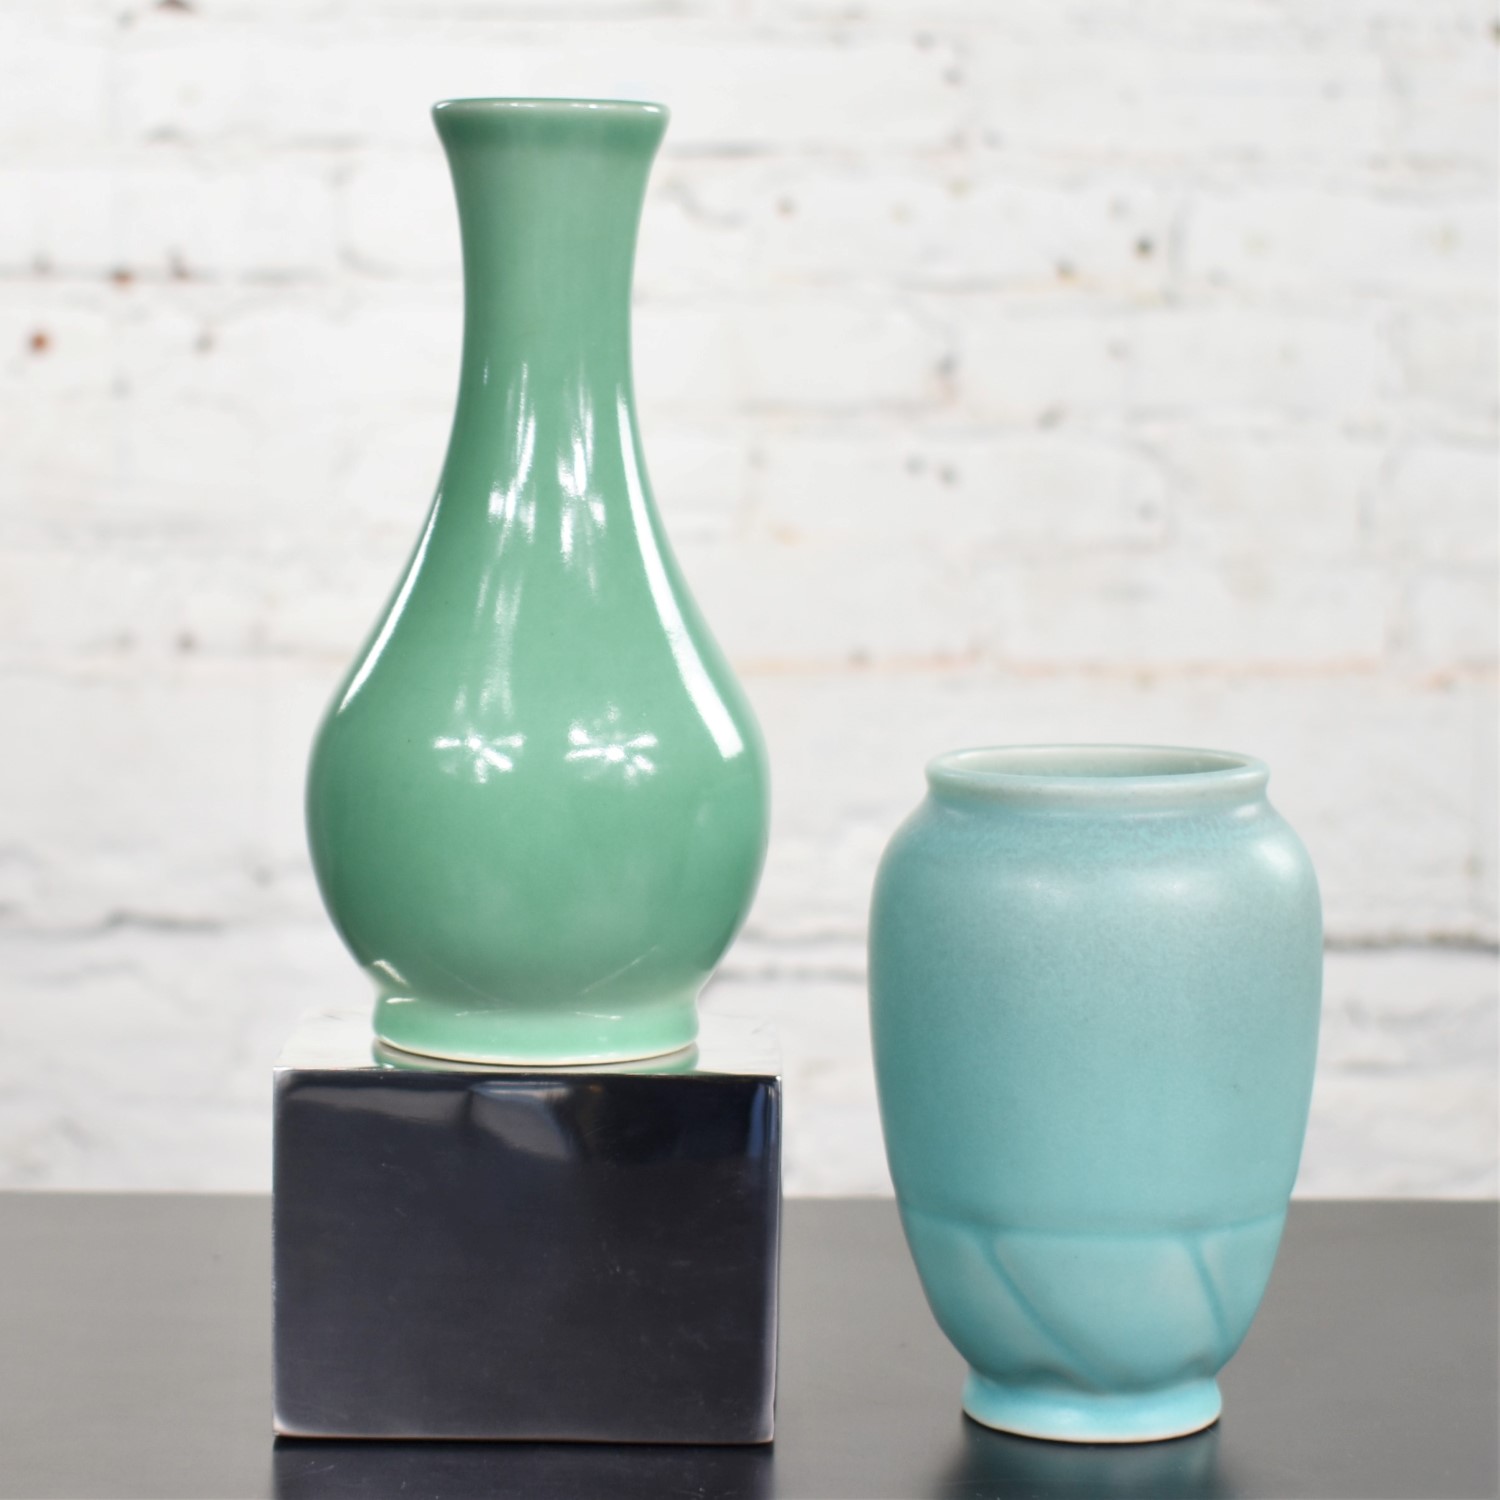 Pair of Petite Rookwood Pottery Arts & Crafts Vases 1 Sea Green & 1 Turquoise